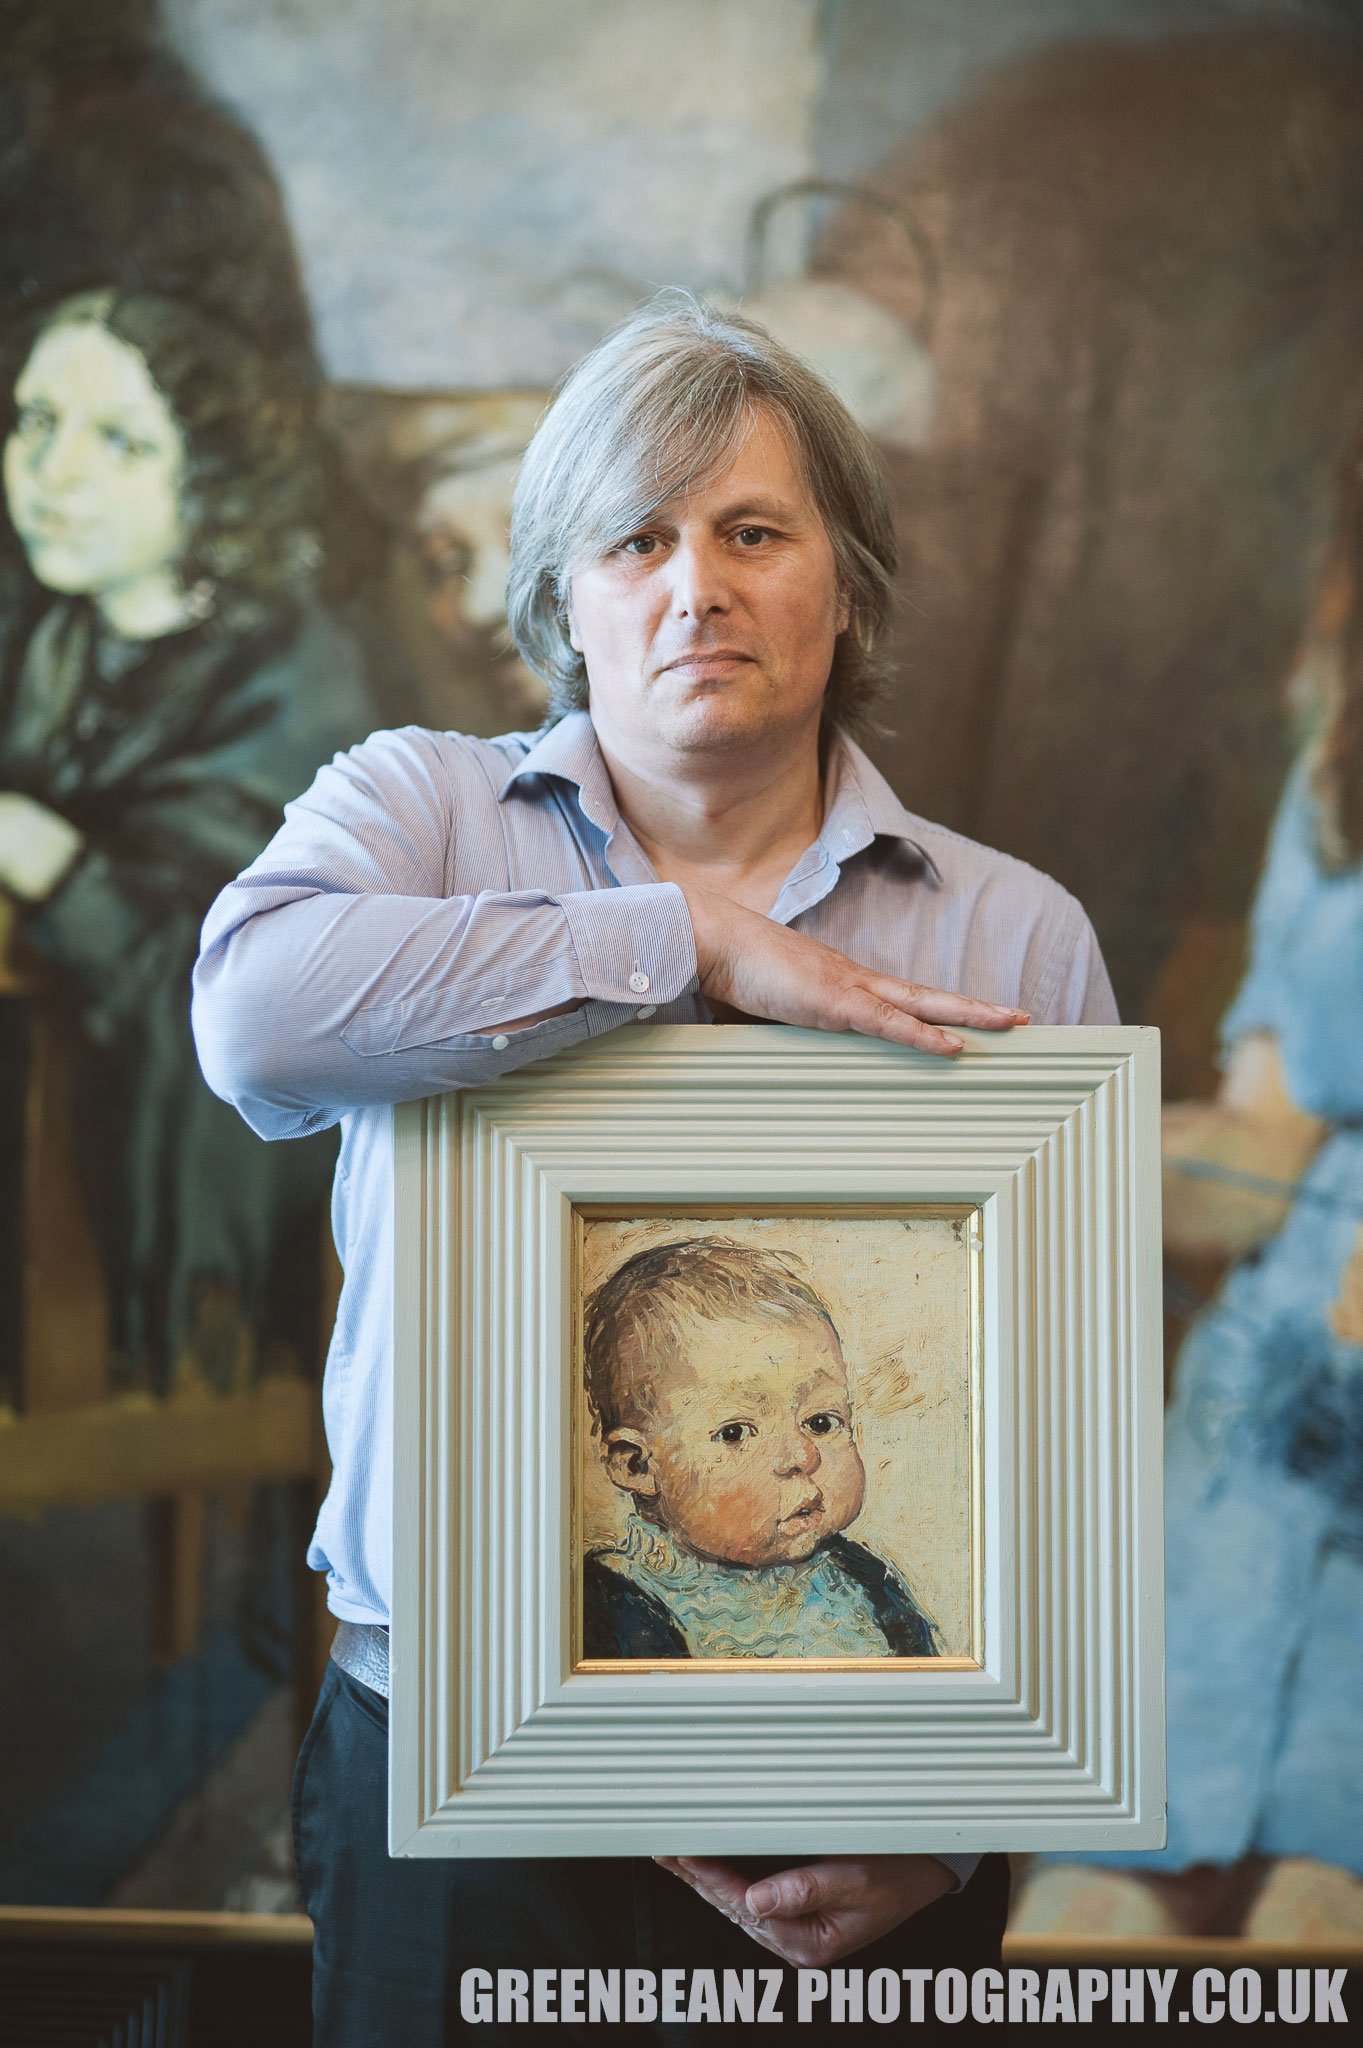 Reuben Lenkiewicz holds a portrait of himself as a baby painted by father Robert